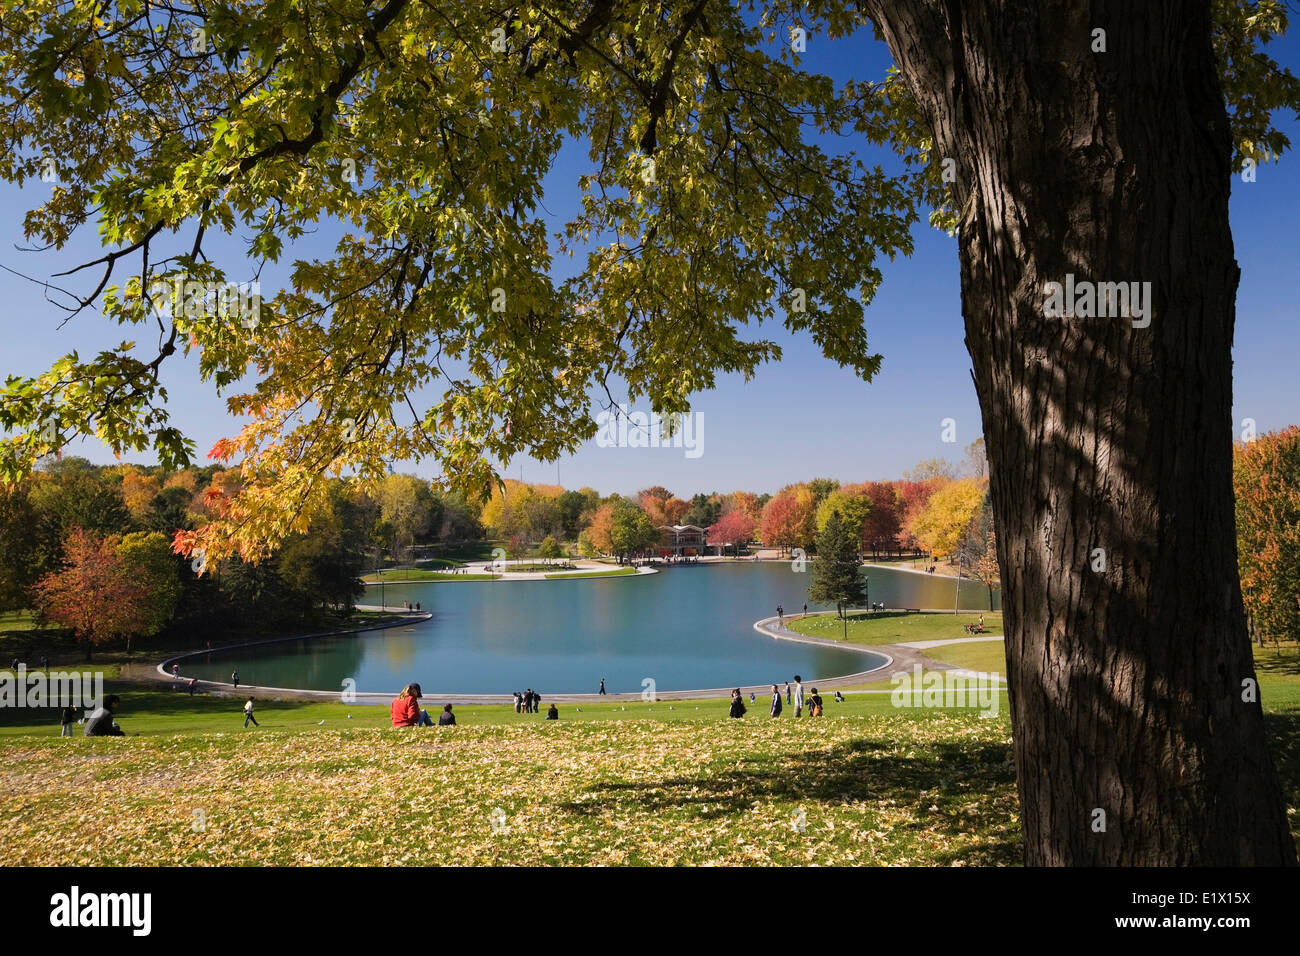 Lac des Castors (Beaver Lake) framed by a maple (Acer) tree on Mount Royal Park in Autumn, Montreal, Quebec, Canada Stock Photo